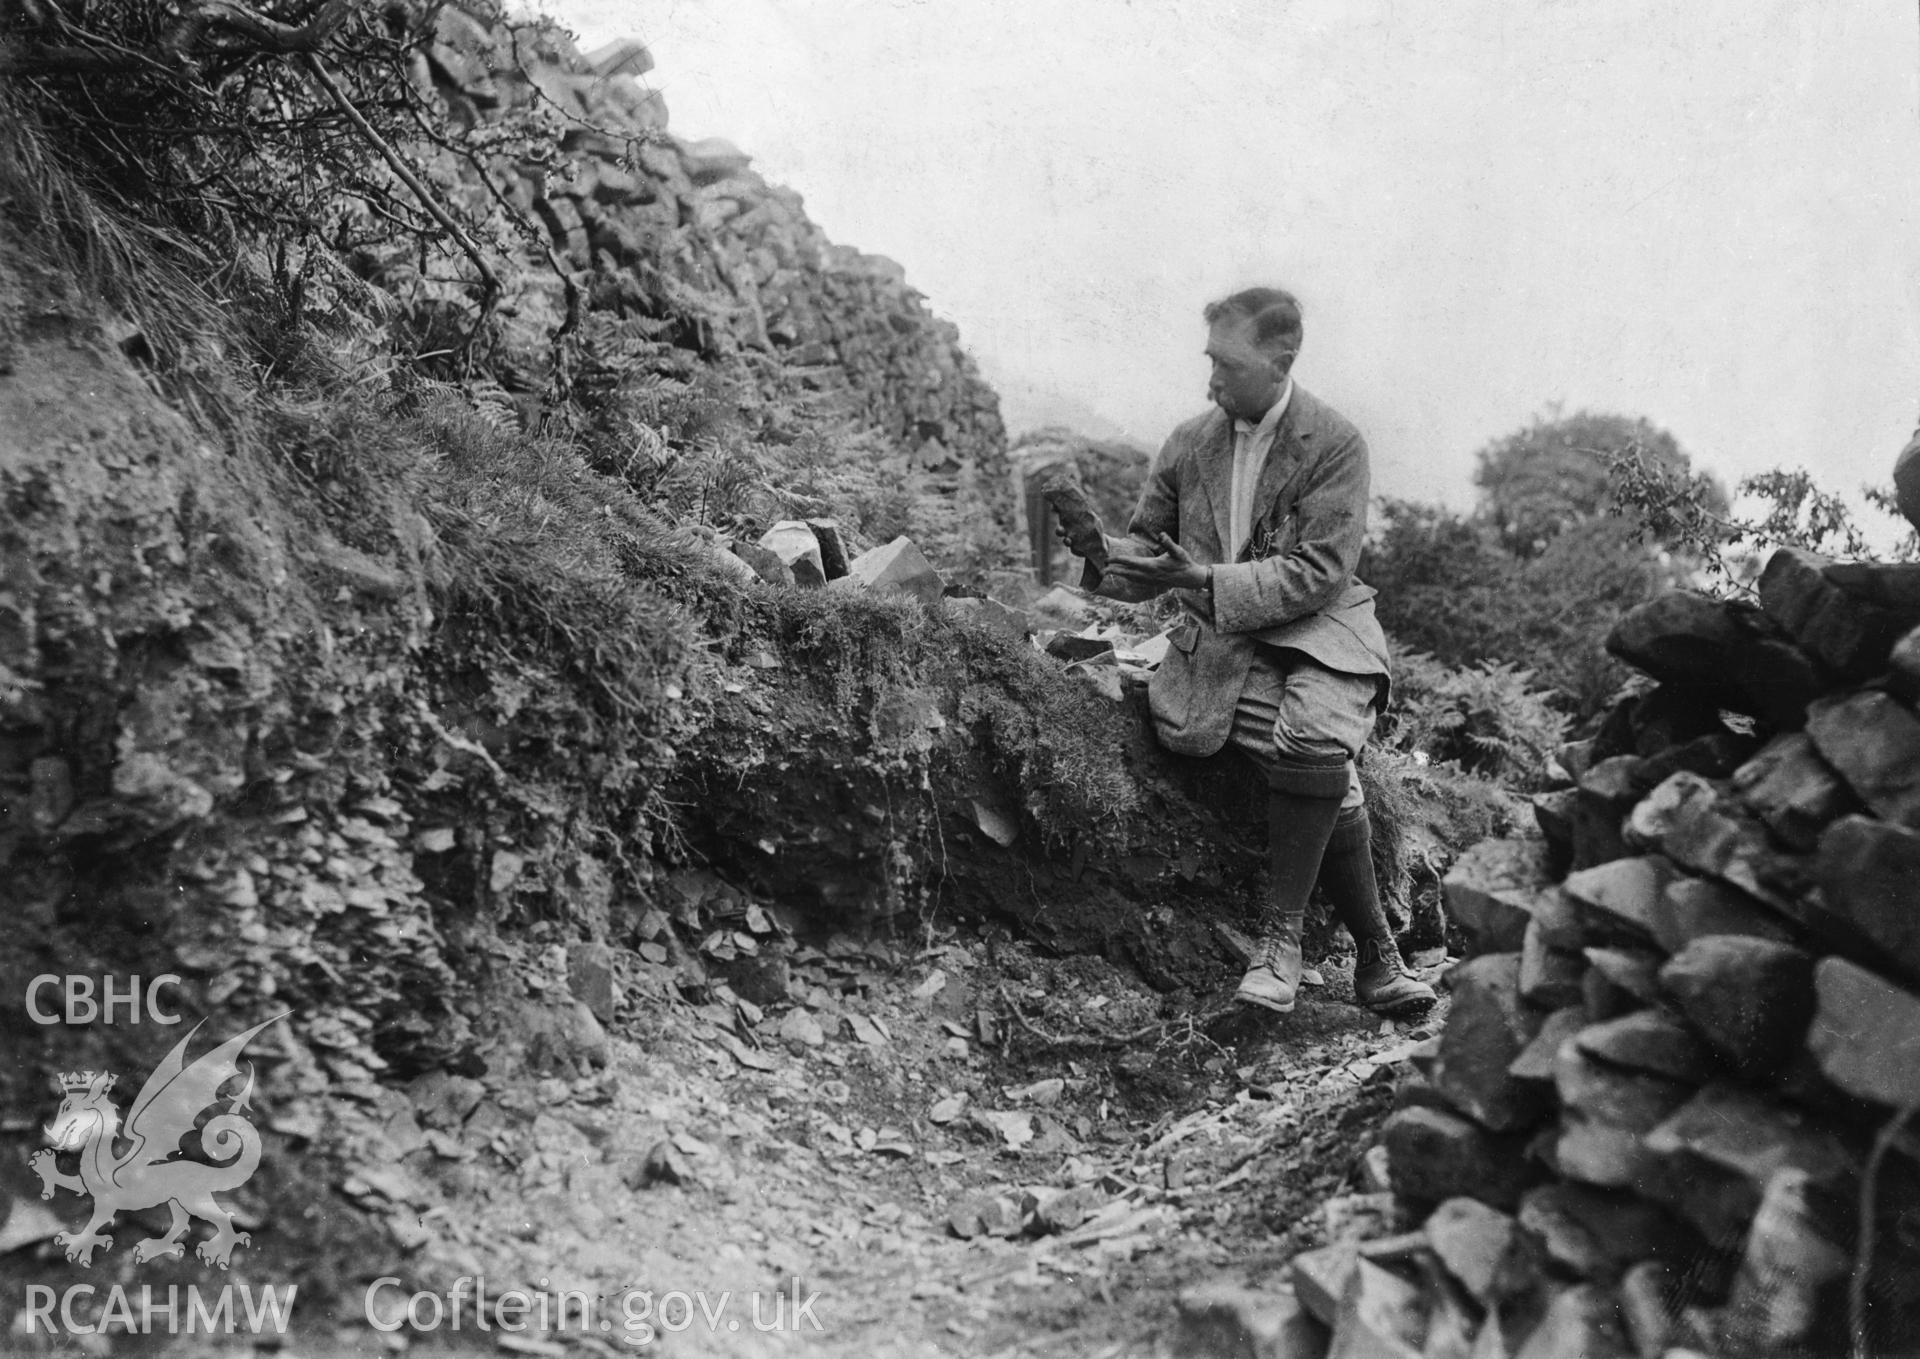 Black and white photograph showing Mr Hazzeldine Waren at the Graiglwyd axe chipping site taken during the 1919-1921 excavations, copied from an original loaned for copying by Ivor Davies.